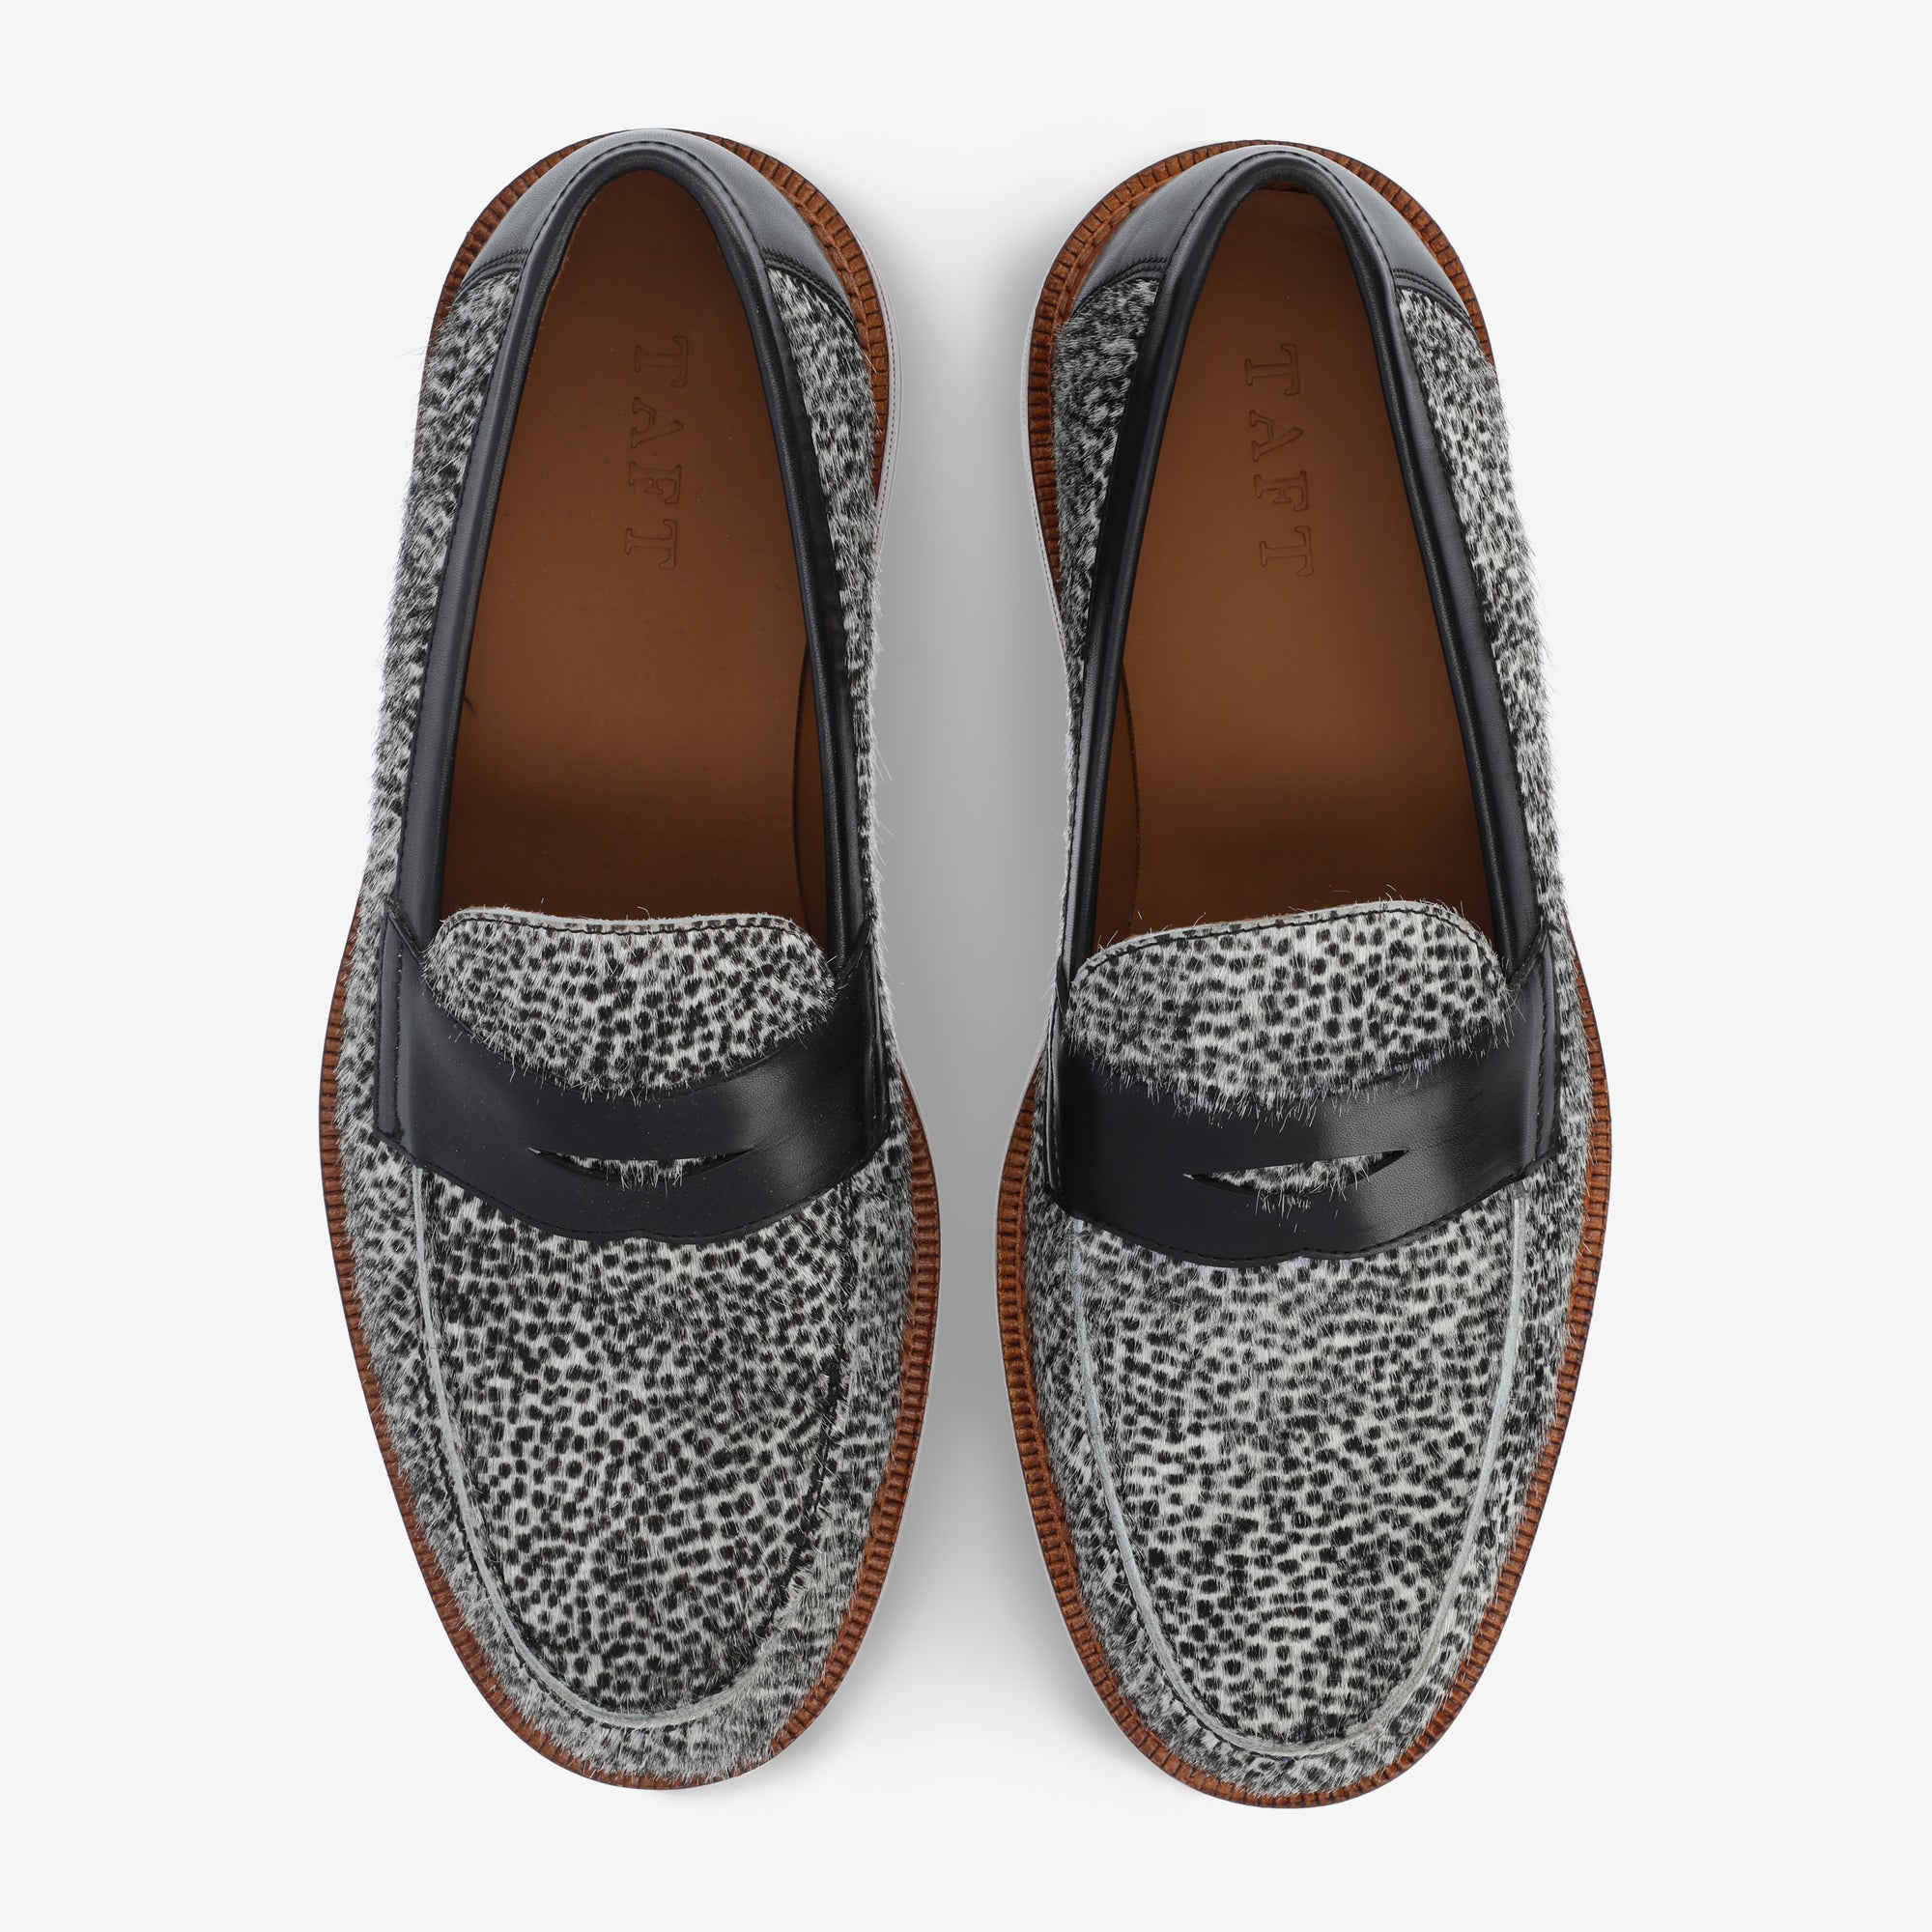 The Fitz Loafer in Rainclouds